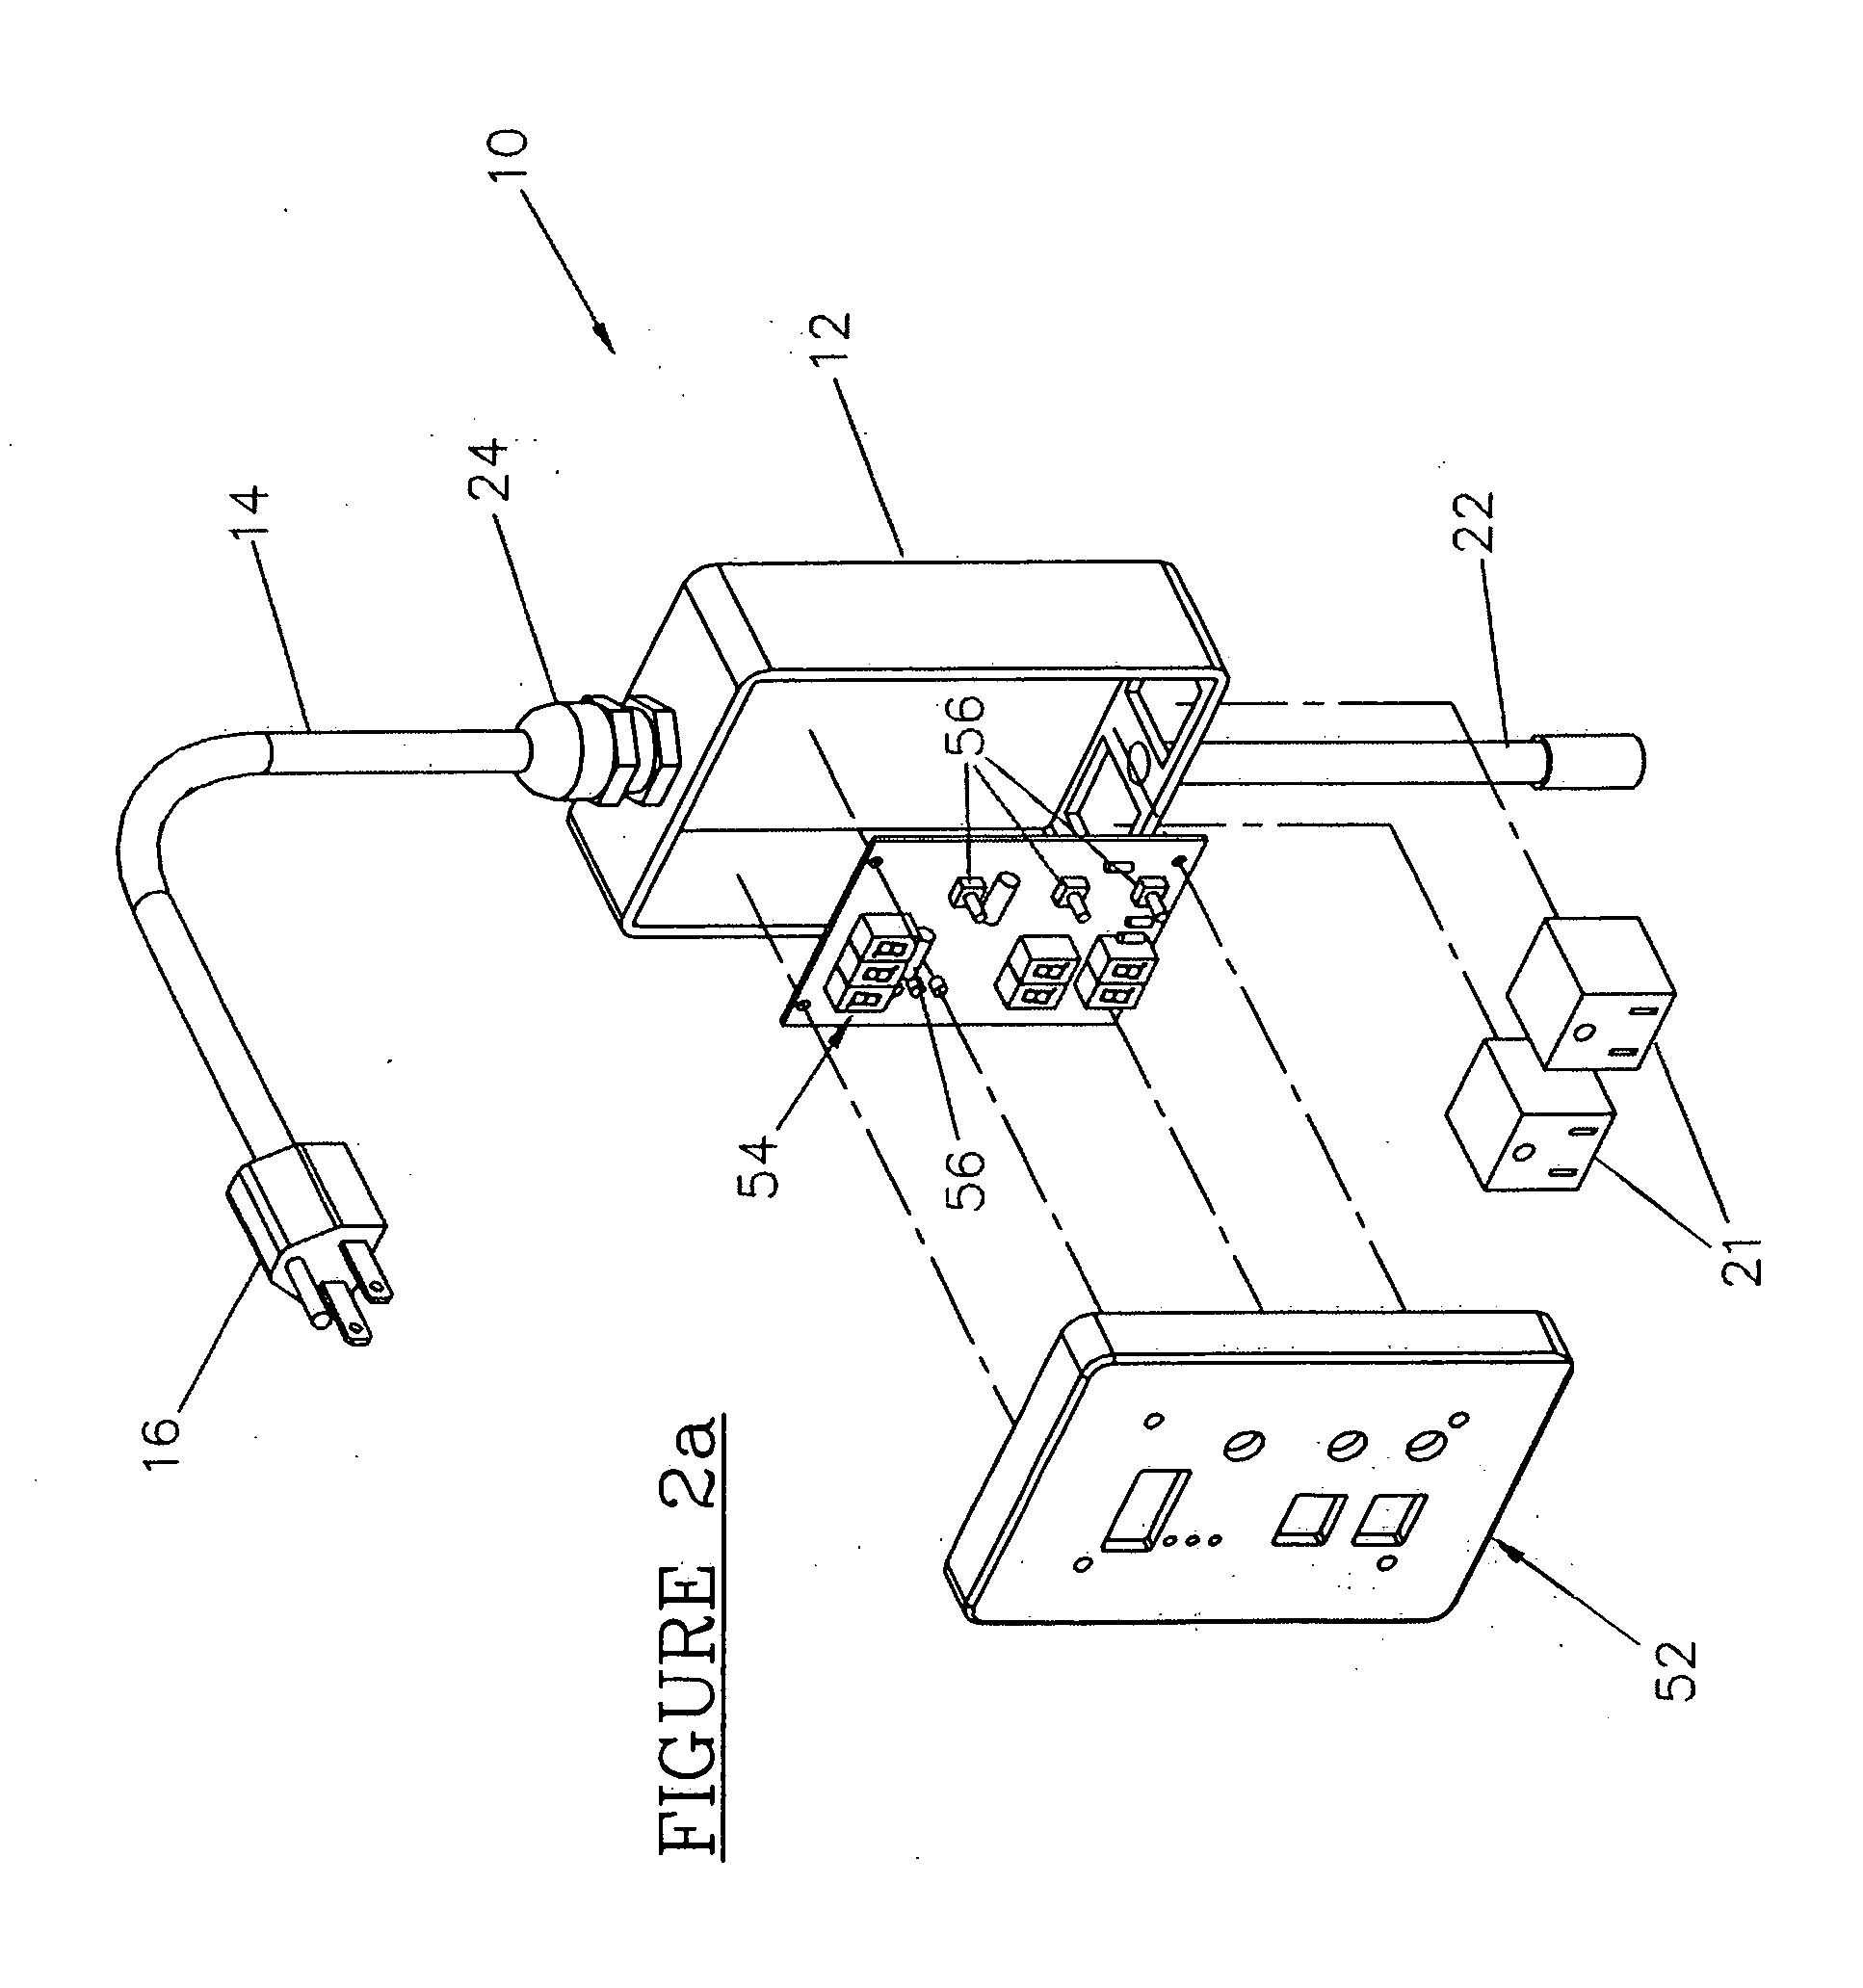 Power control system for heating devices and method of providing a heated microenvironment within a larger environment